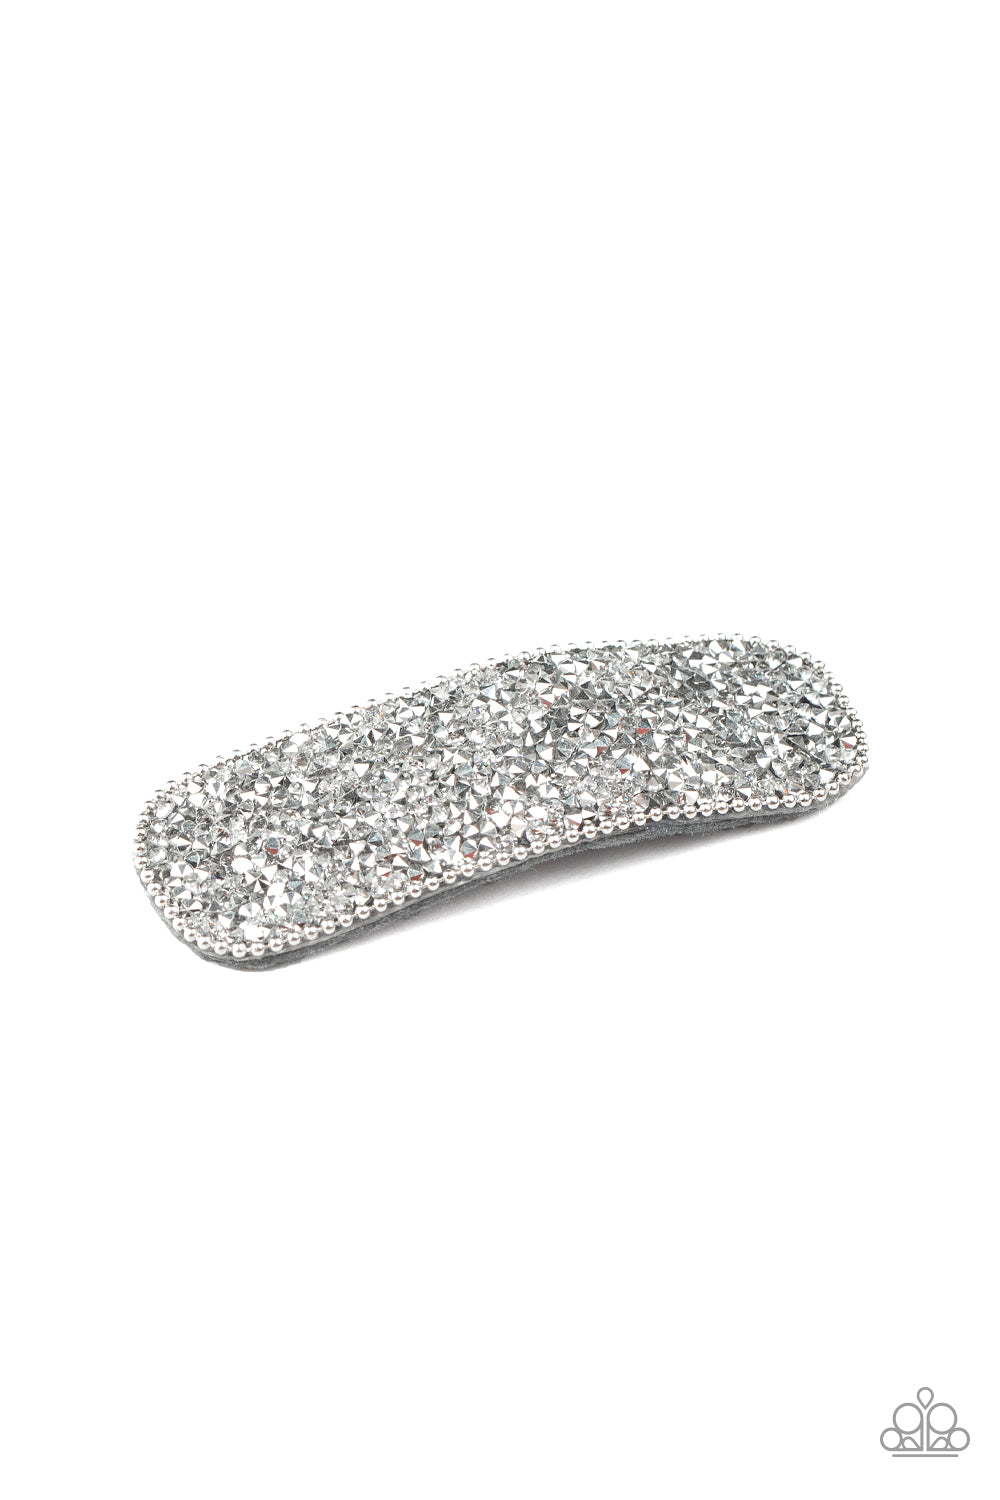 From HAIR On Out Hair Clip (Black, Silver)